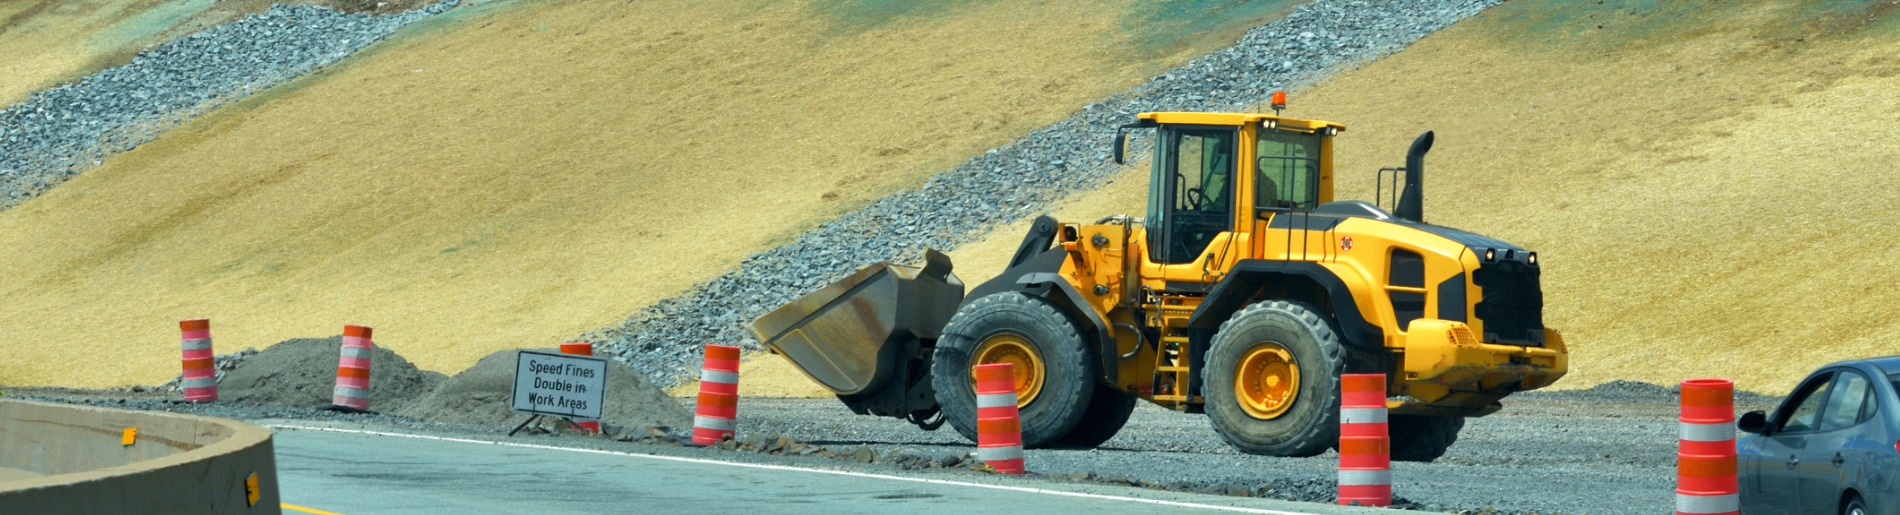 Road under construction with pay loader